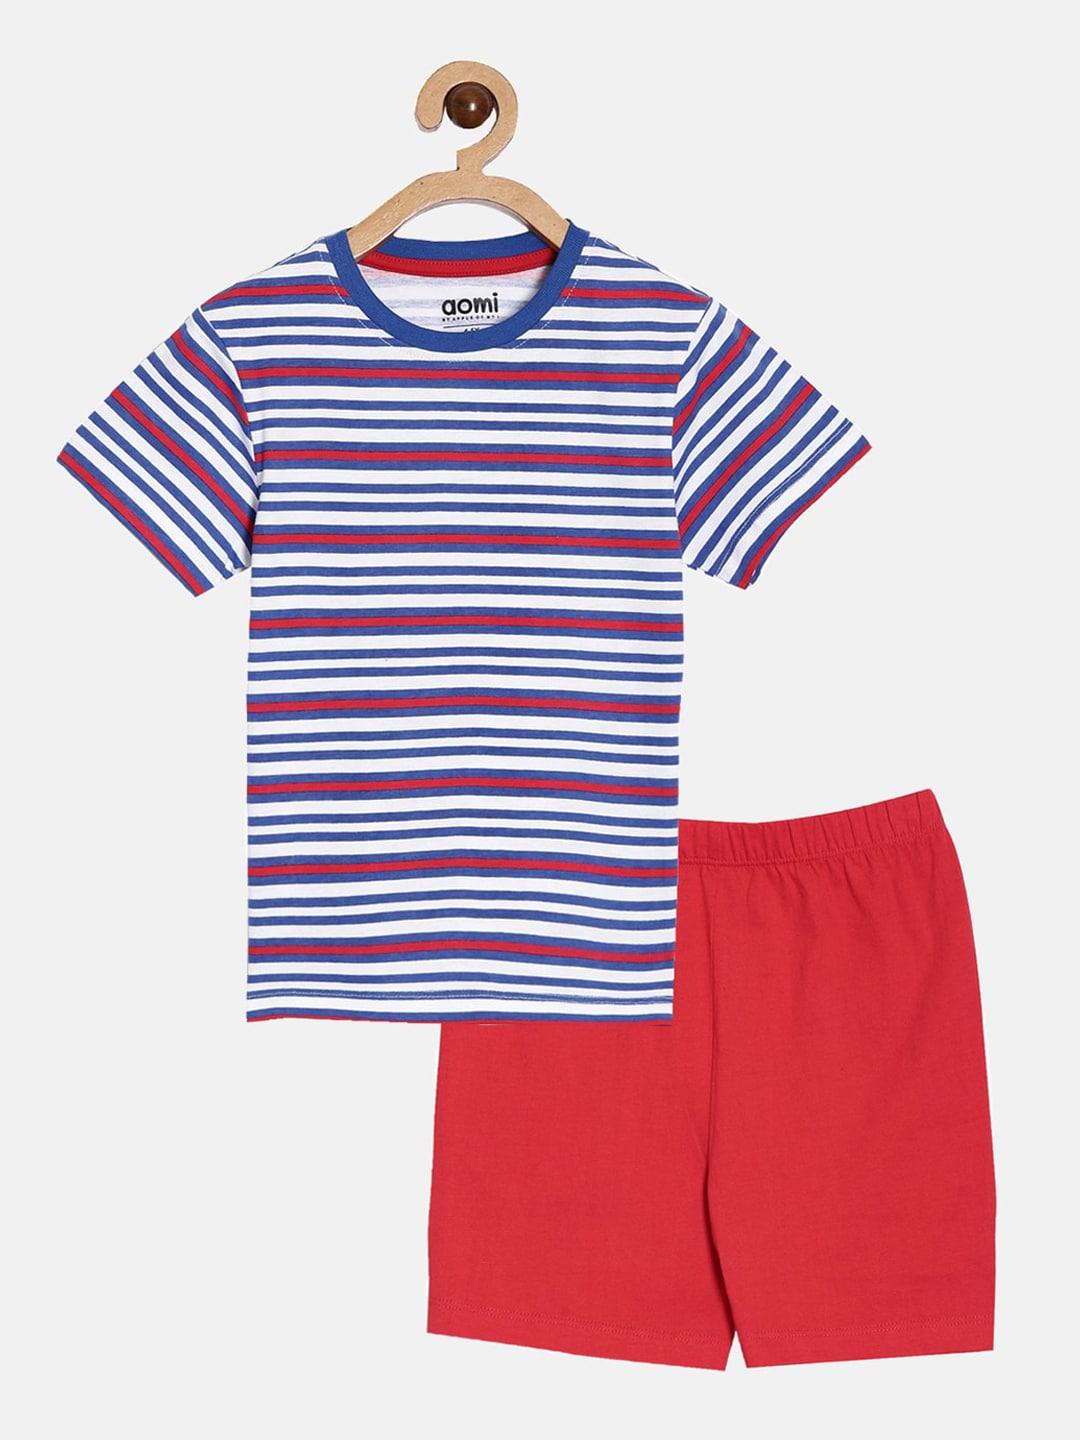 aomi-boys-blue-&-red-printed-t-shirt-with-shorts